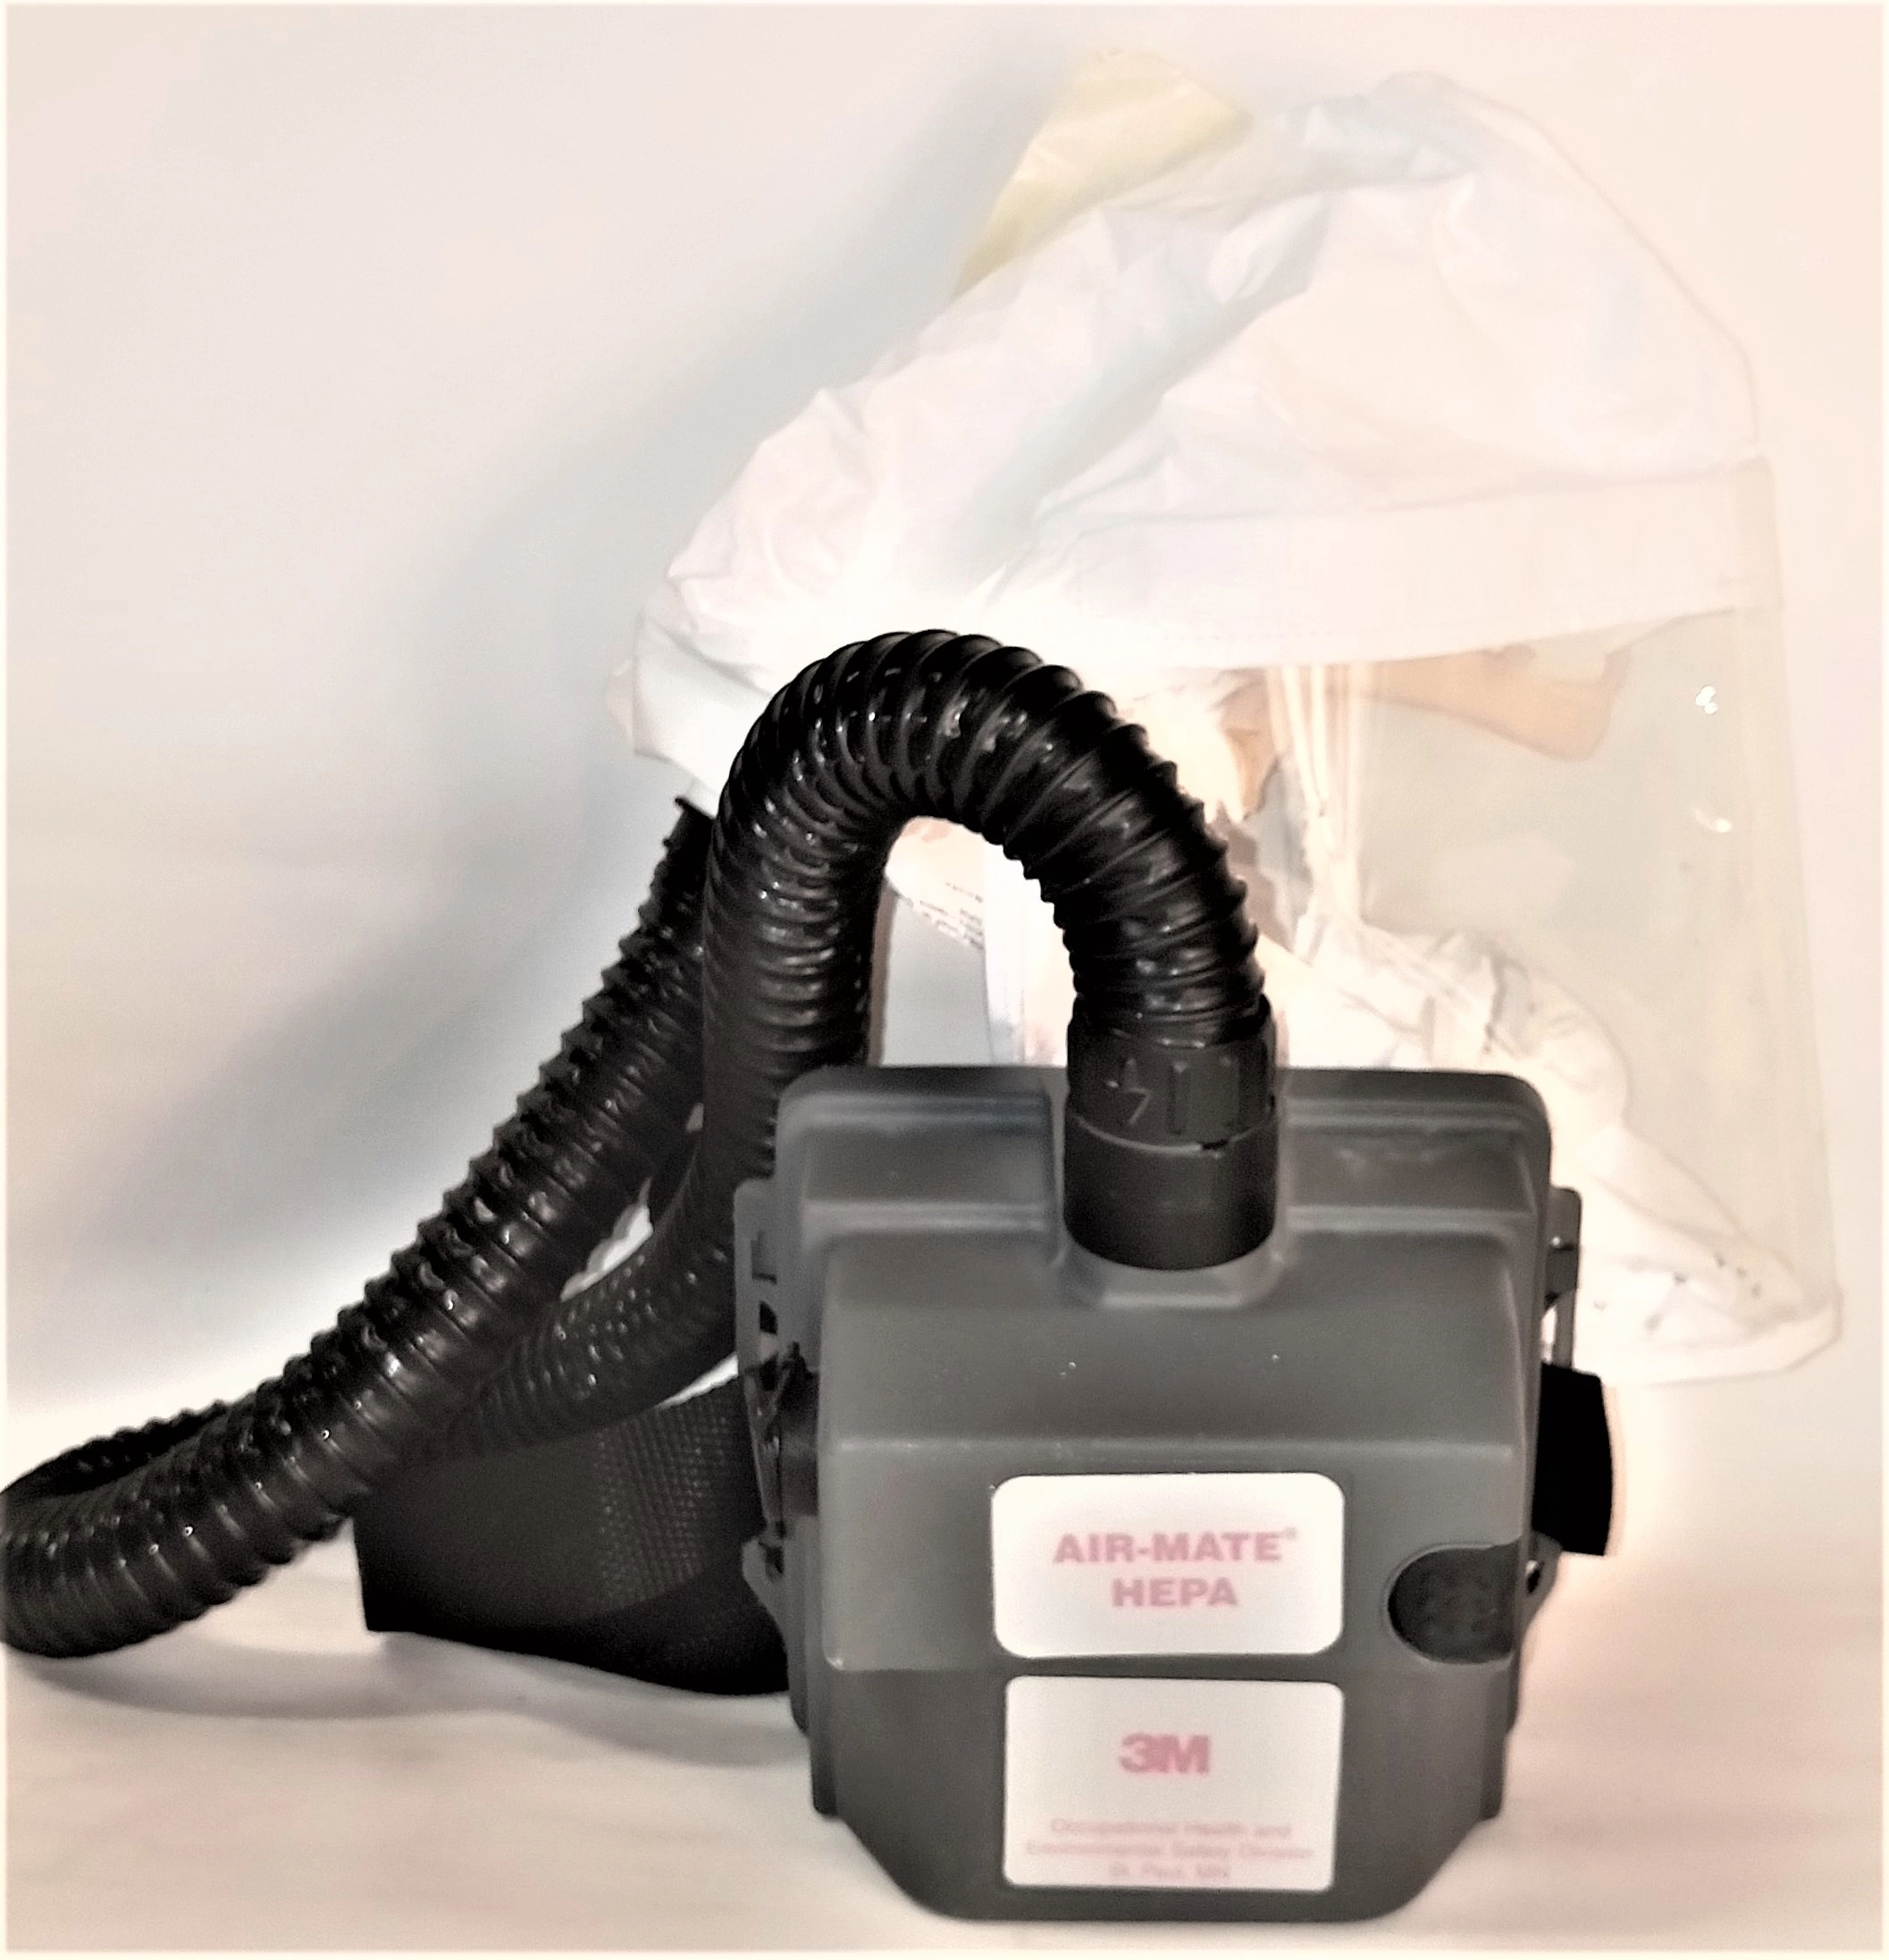 3M Air-Mate HEPA Respirator (PAPR) Unit with Head Cover (Regular Size)